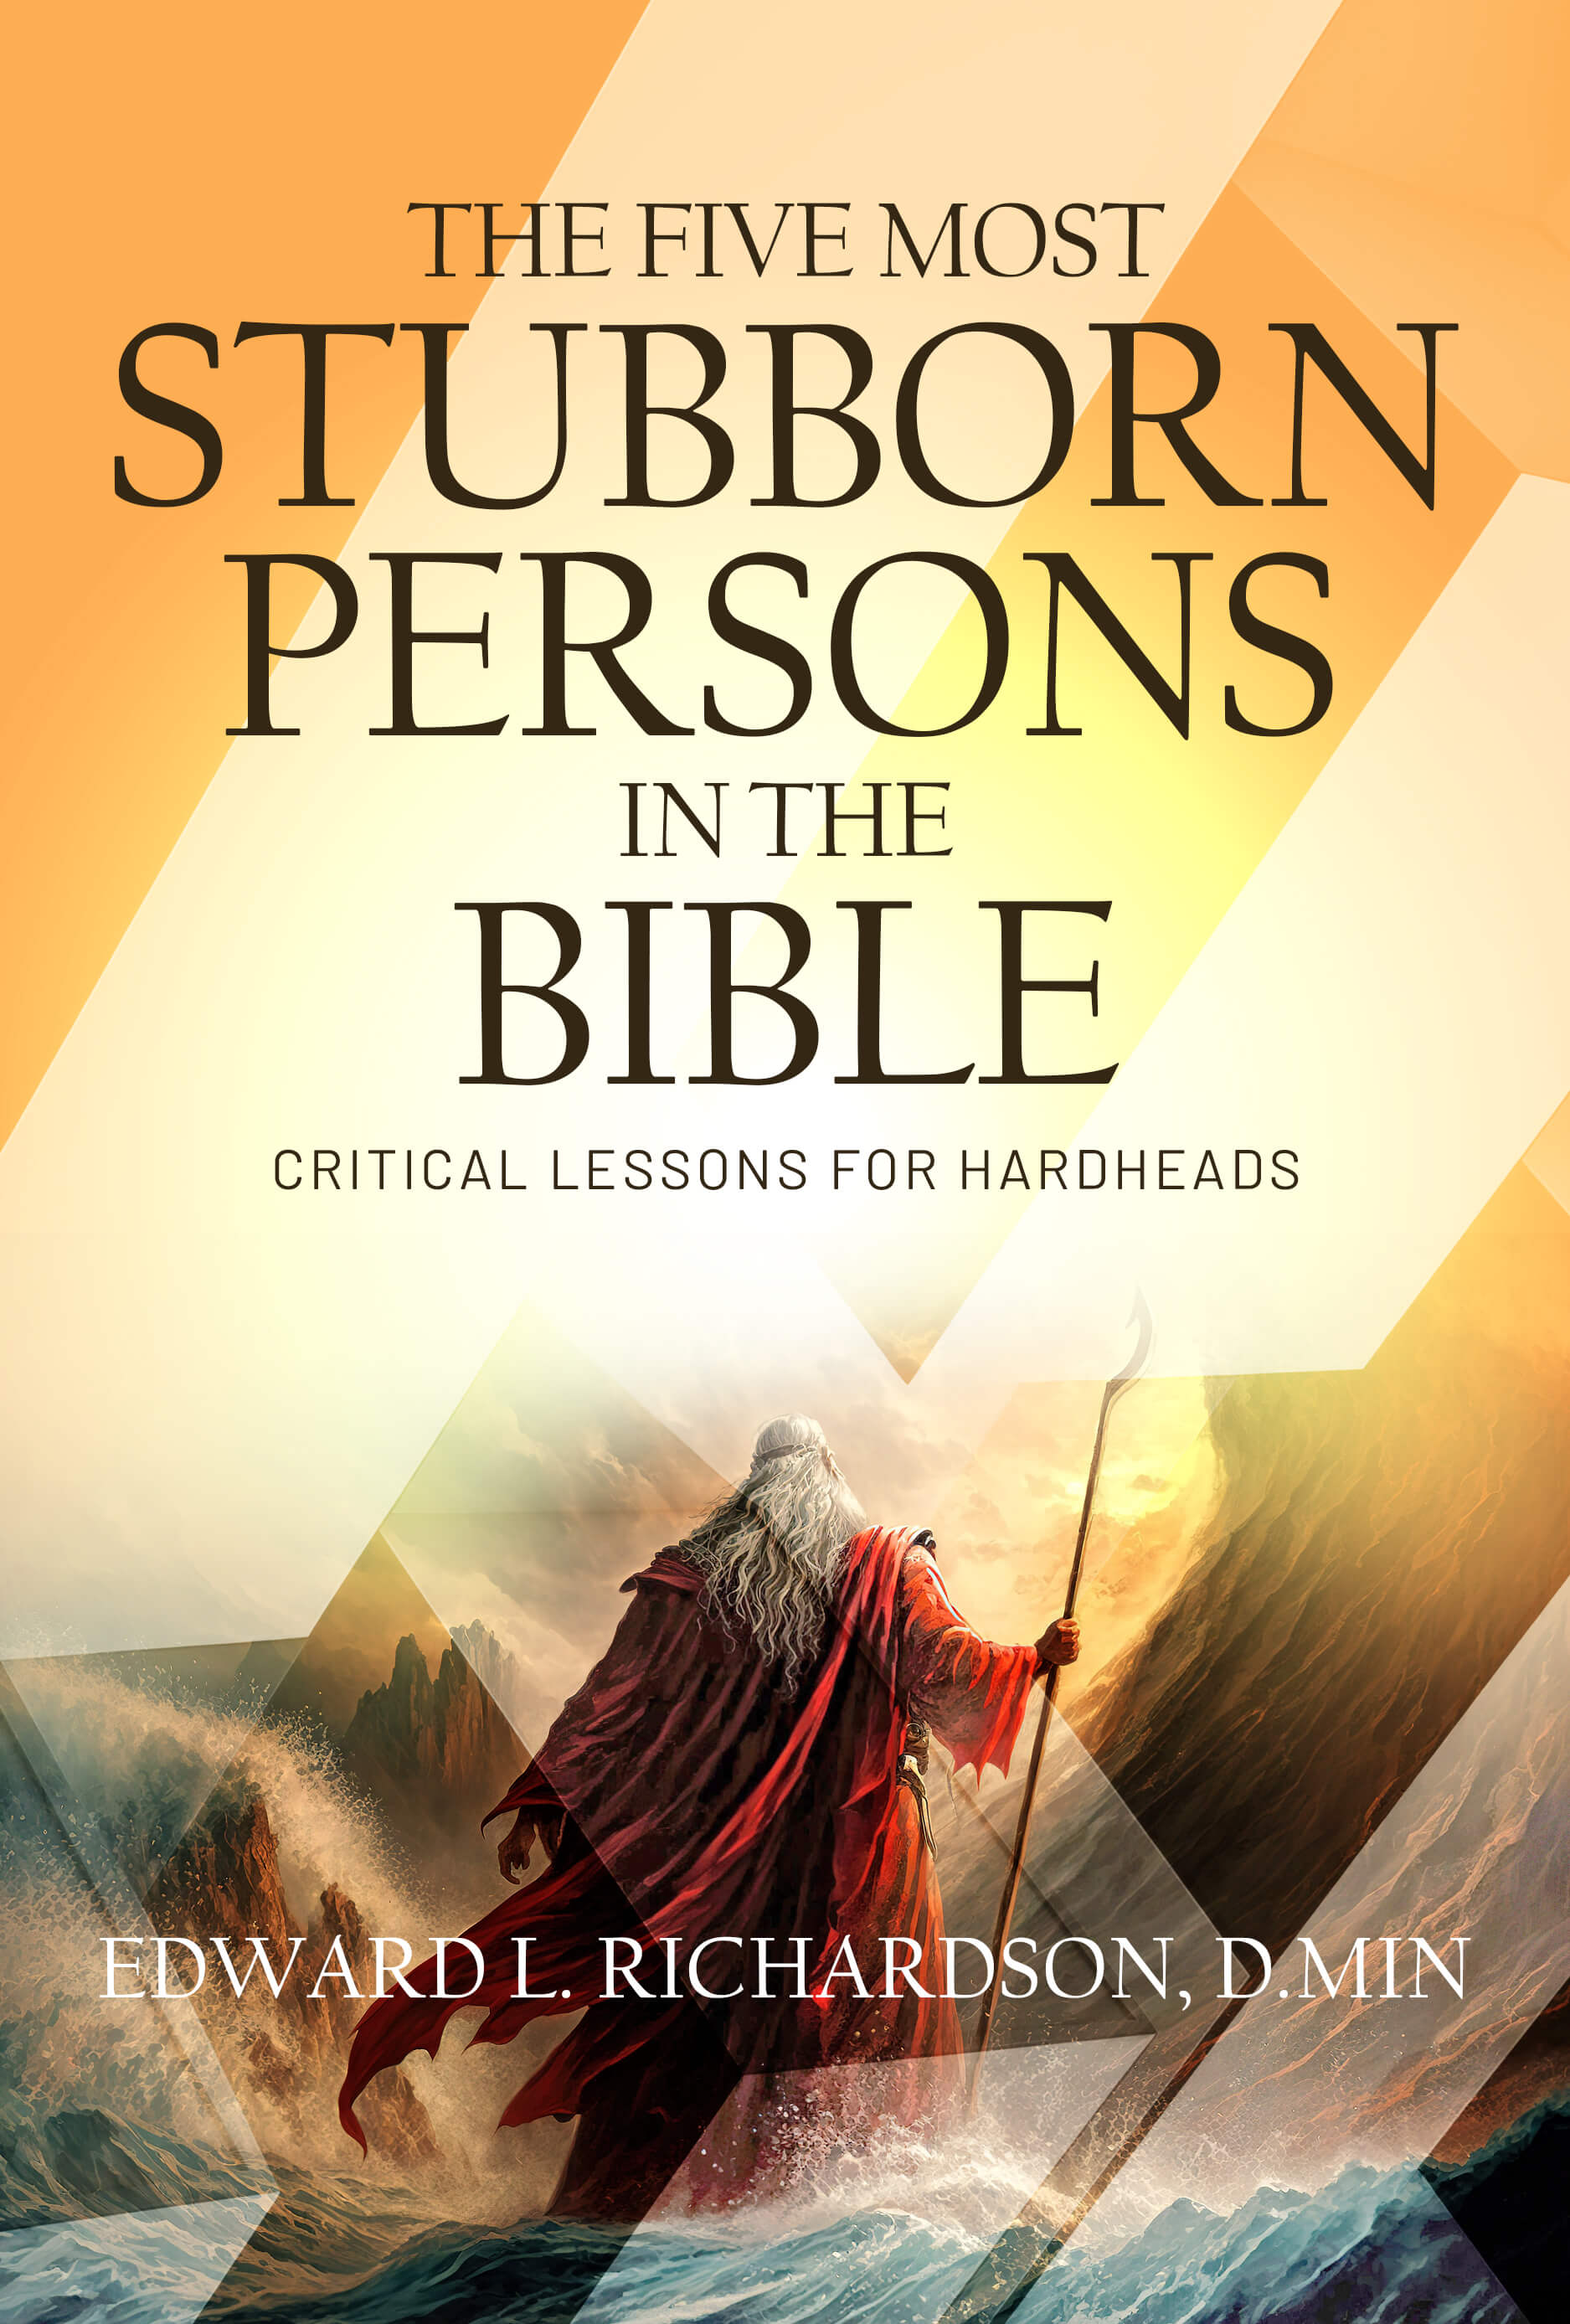 The Five Most Stubborn Persons in the Bible